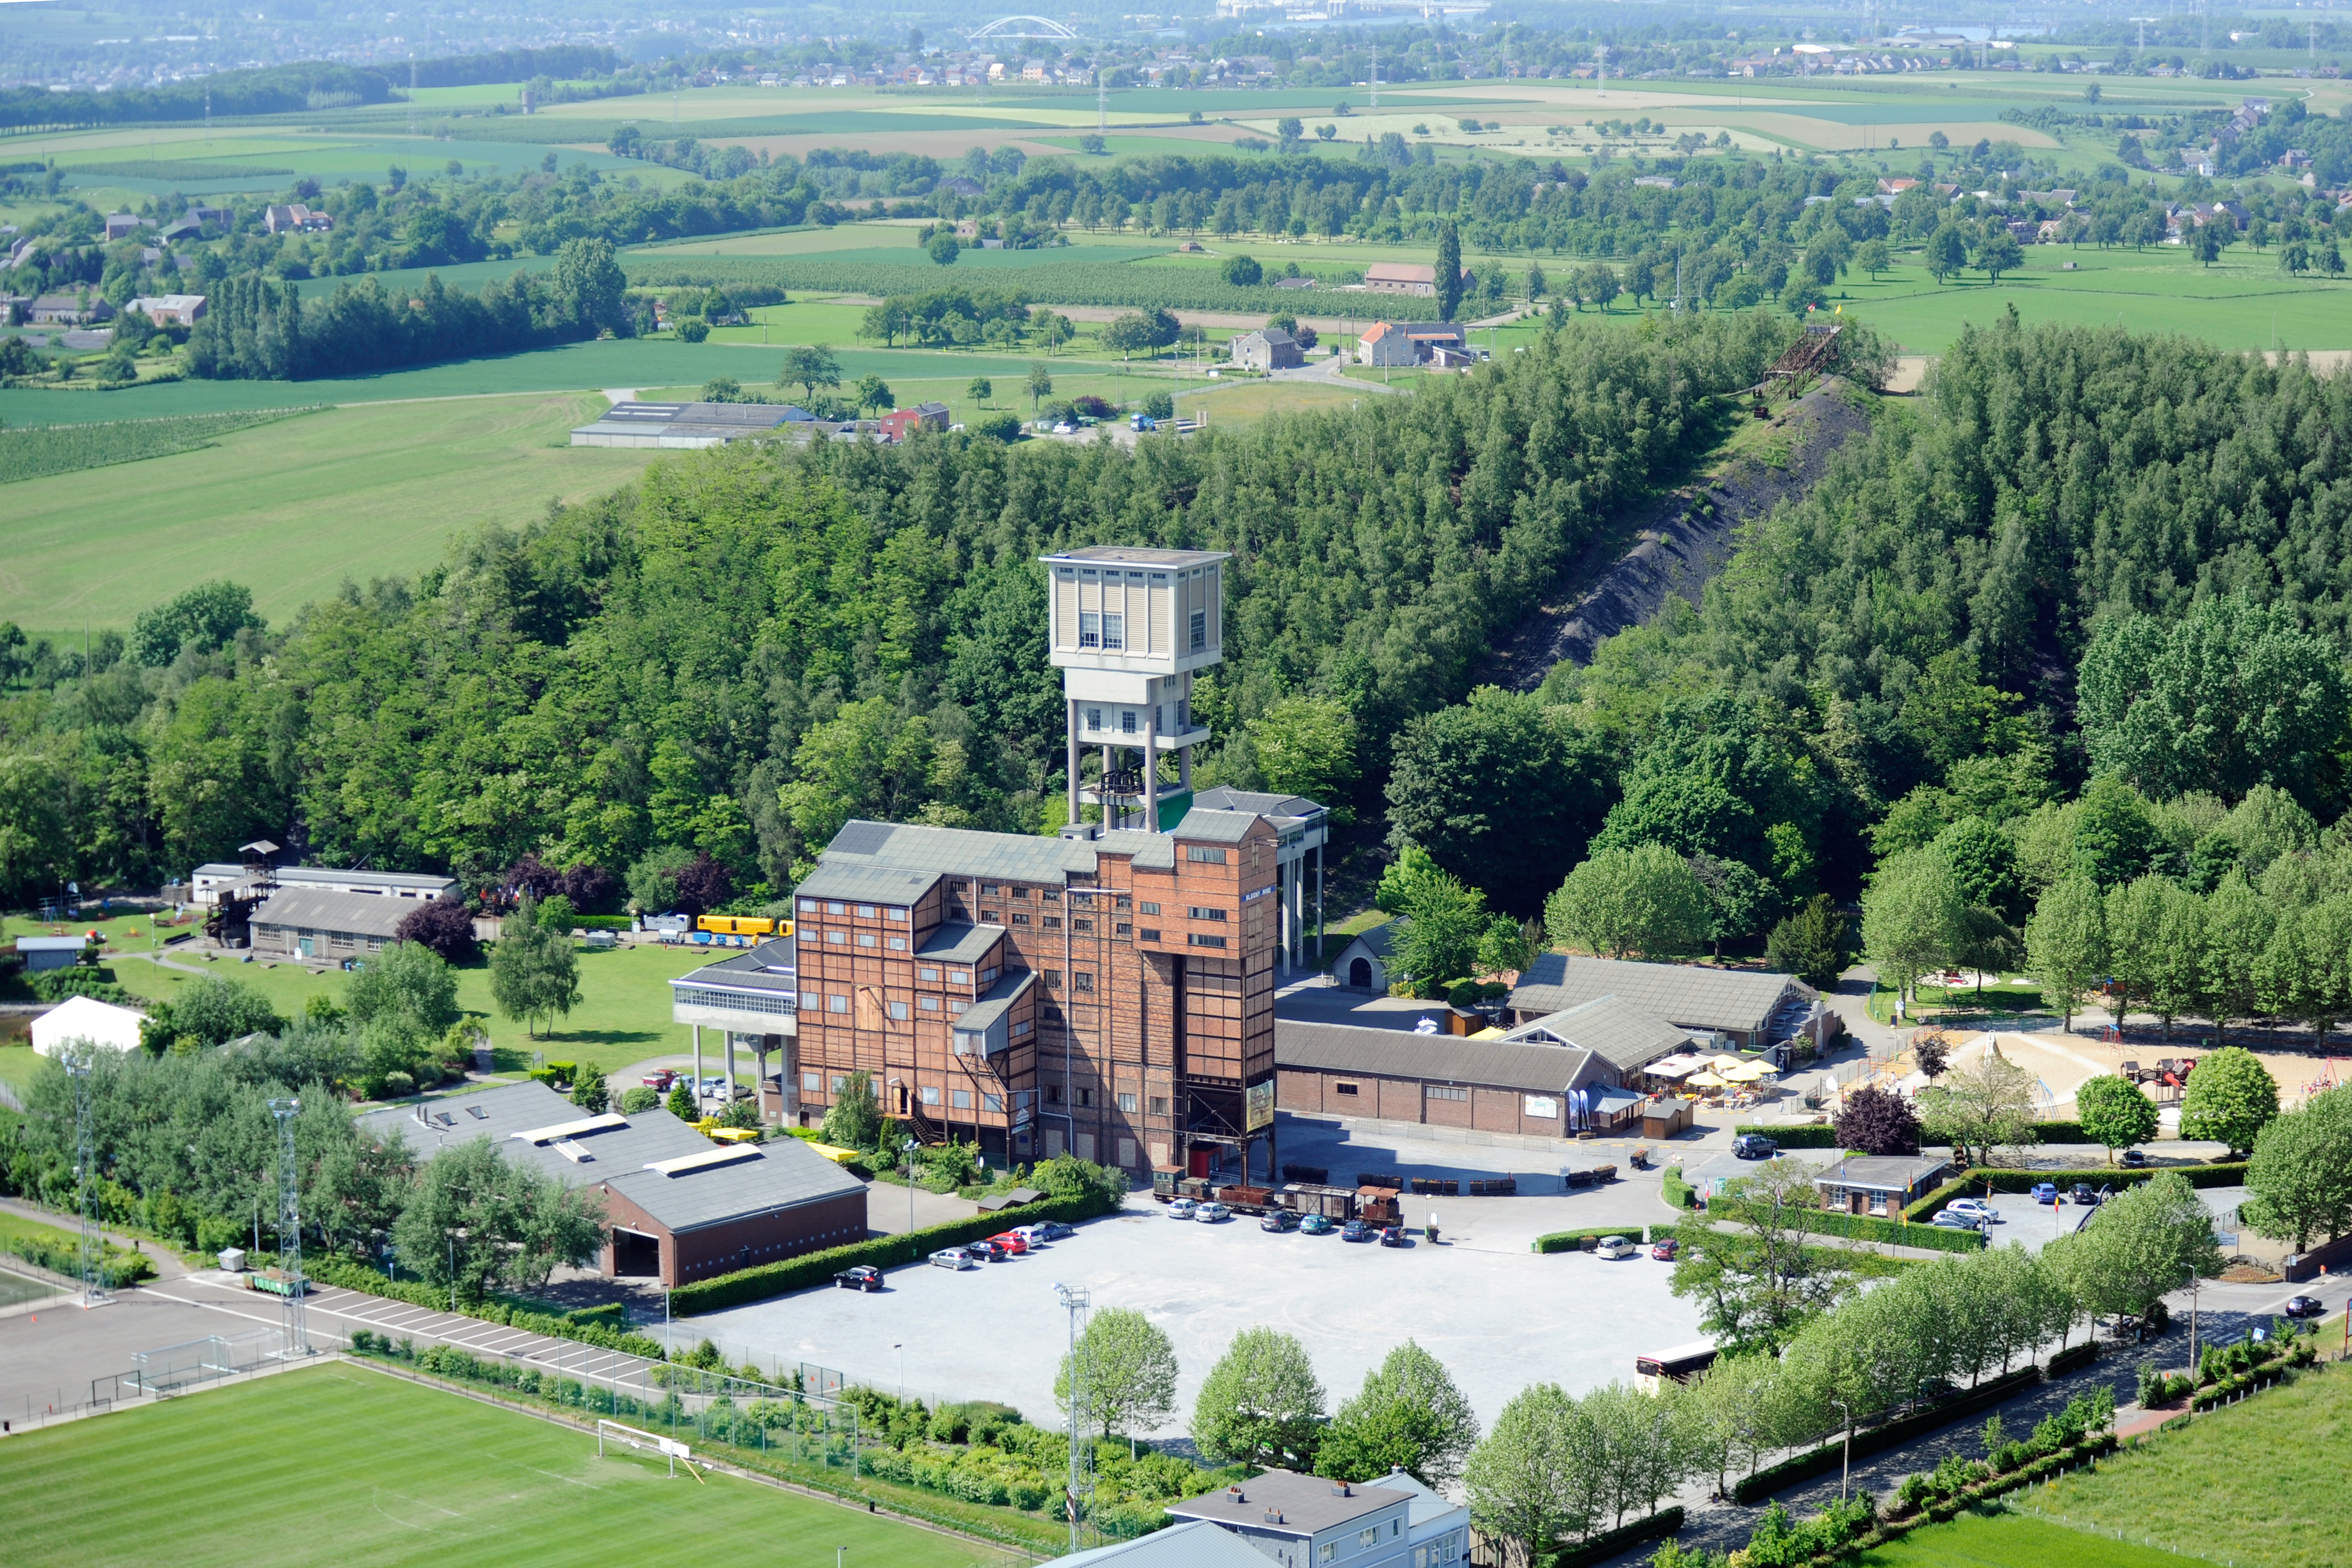 Discover Blegny-Mine: a major European mining site, listed by UNESCO